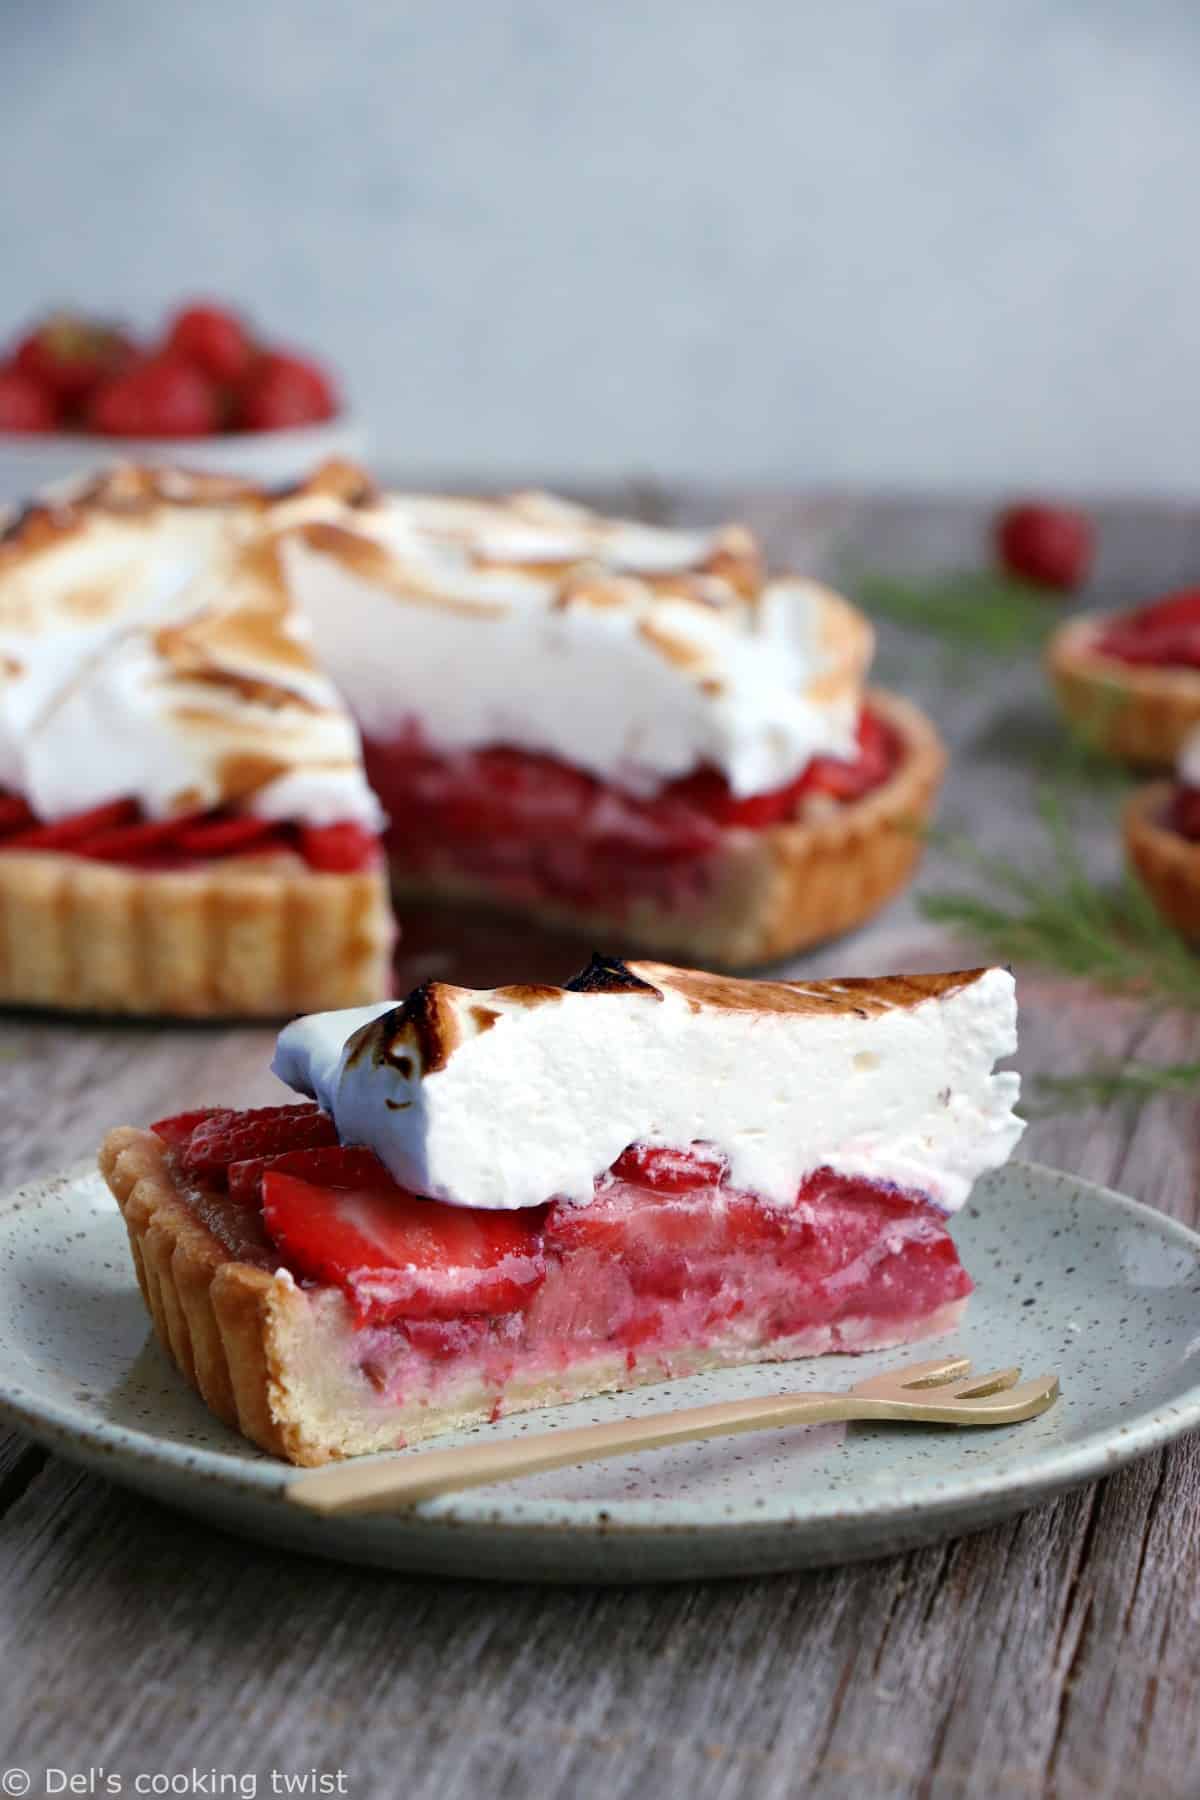 Meringue Strawberry Rhubarb Pie. Beautiful Strawberry Rhubarb Meringue Pie filled with a subtle almond cream is a perfect summer dessert with a great balance of sweetness and tartness. Simply delicious!